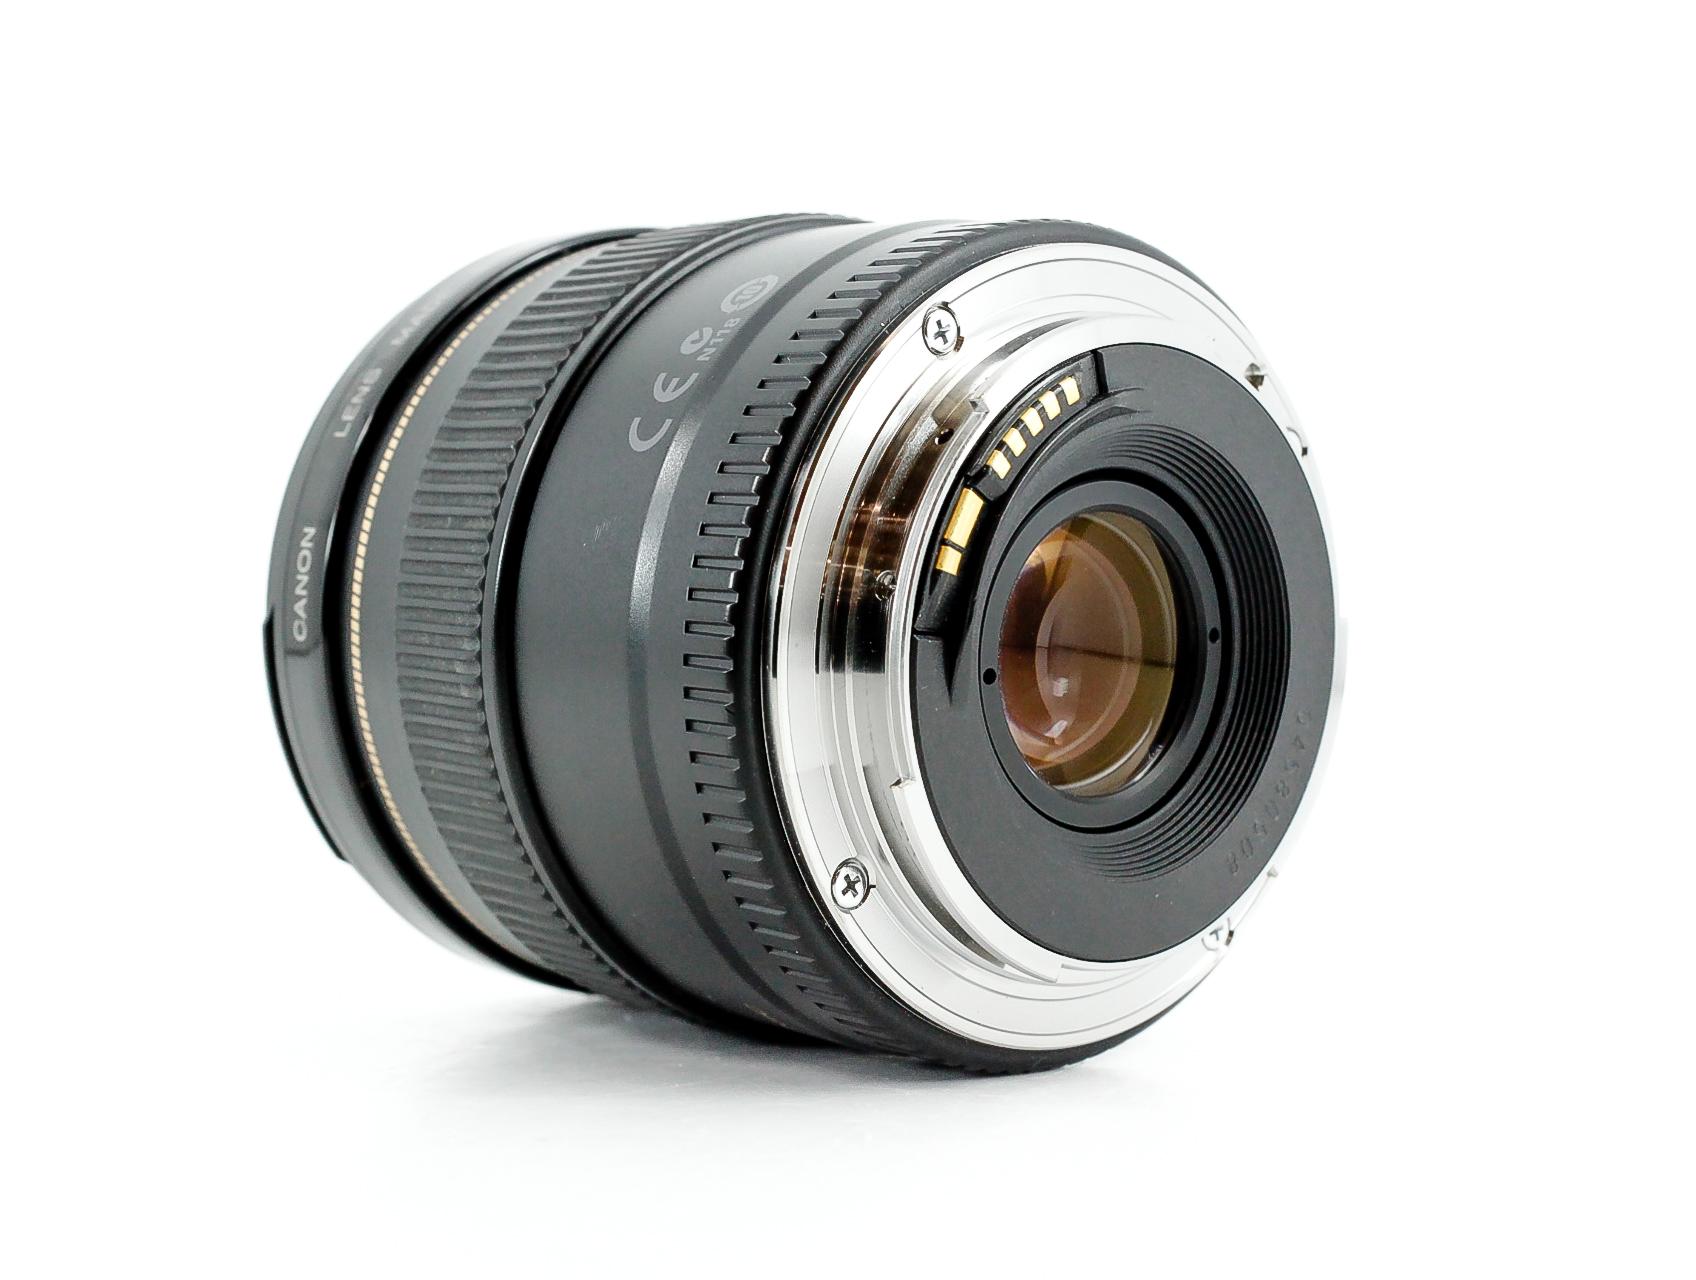 Buy - Canon EF 20mm f/2.8 USM Ultra Wide Angle Lens (p/n 